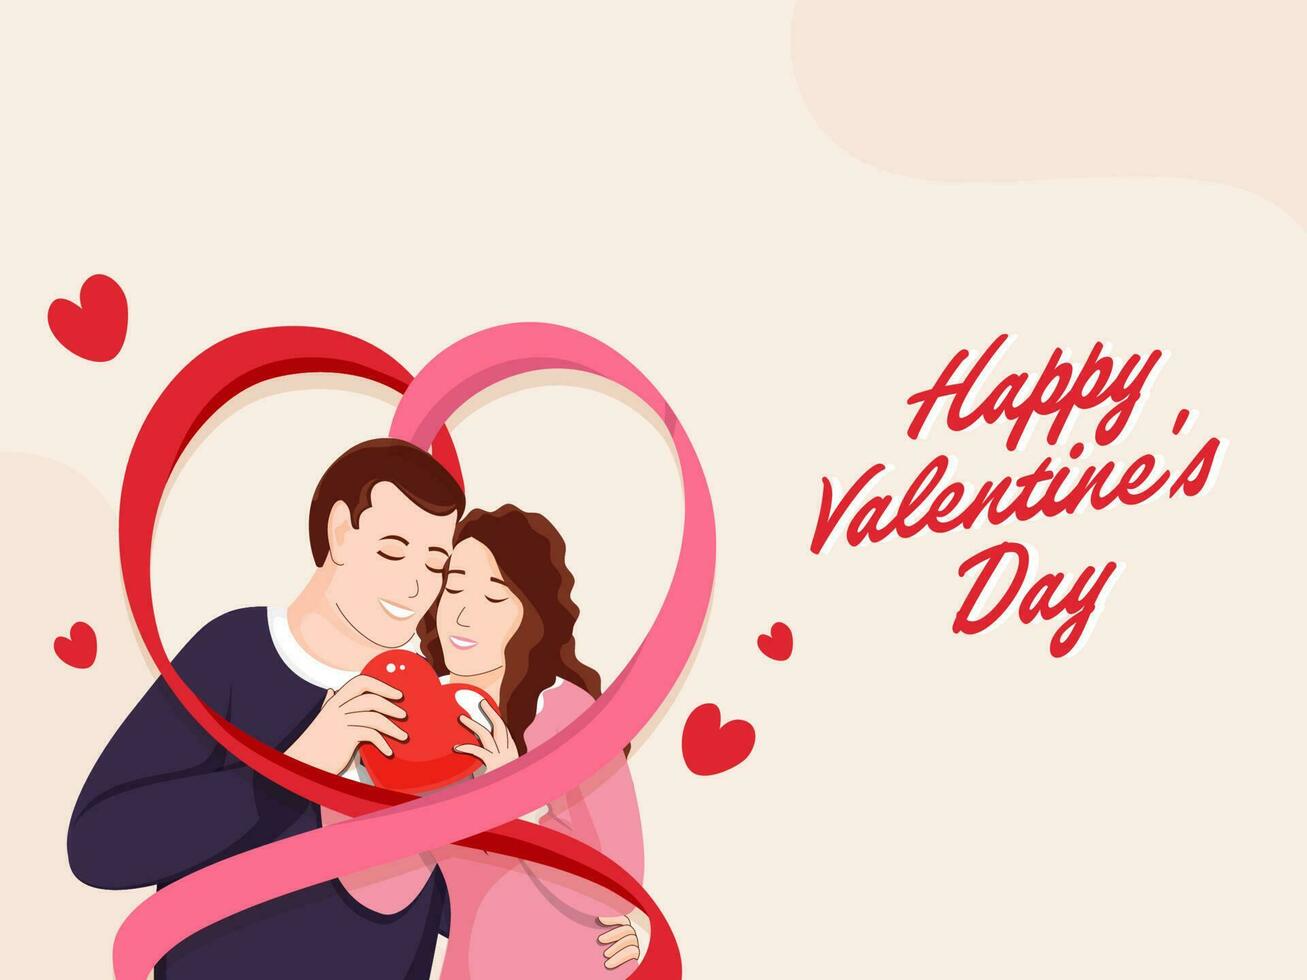 Happy Valentine's Day Poster Design With Romantic Couple In Heart Shape Making By Ribbon On Cosmic Latte Background. vector